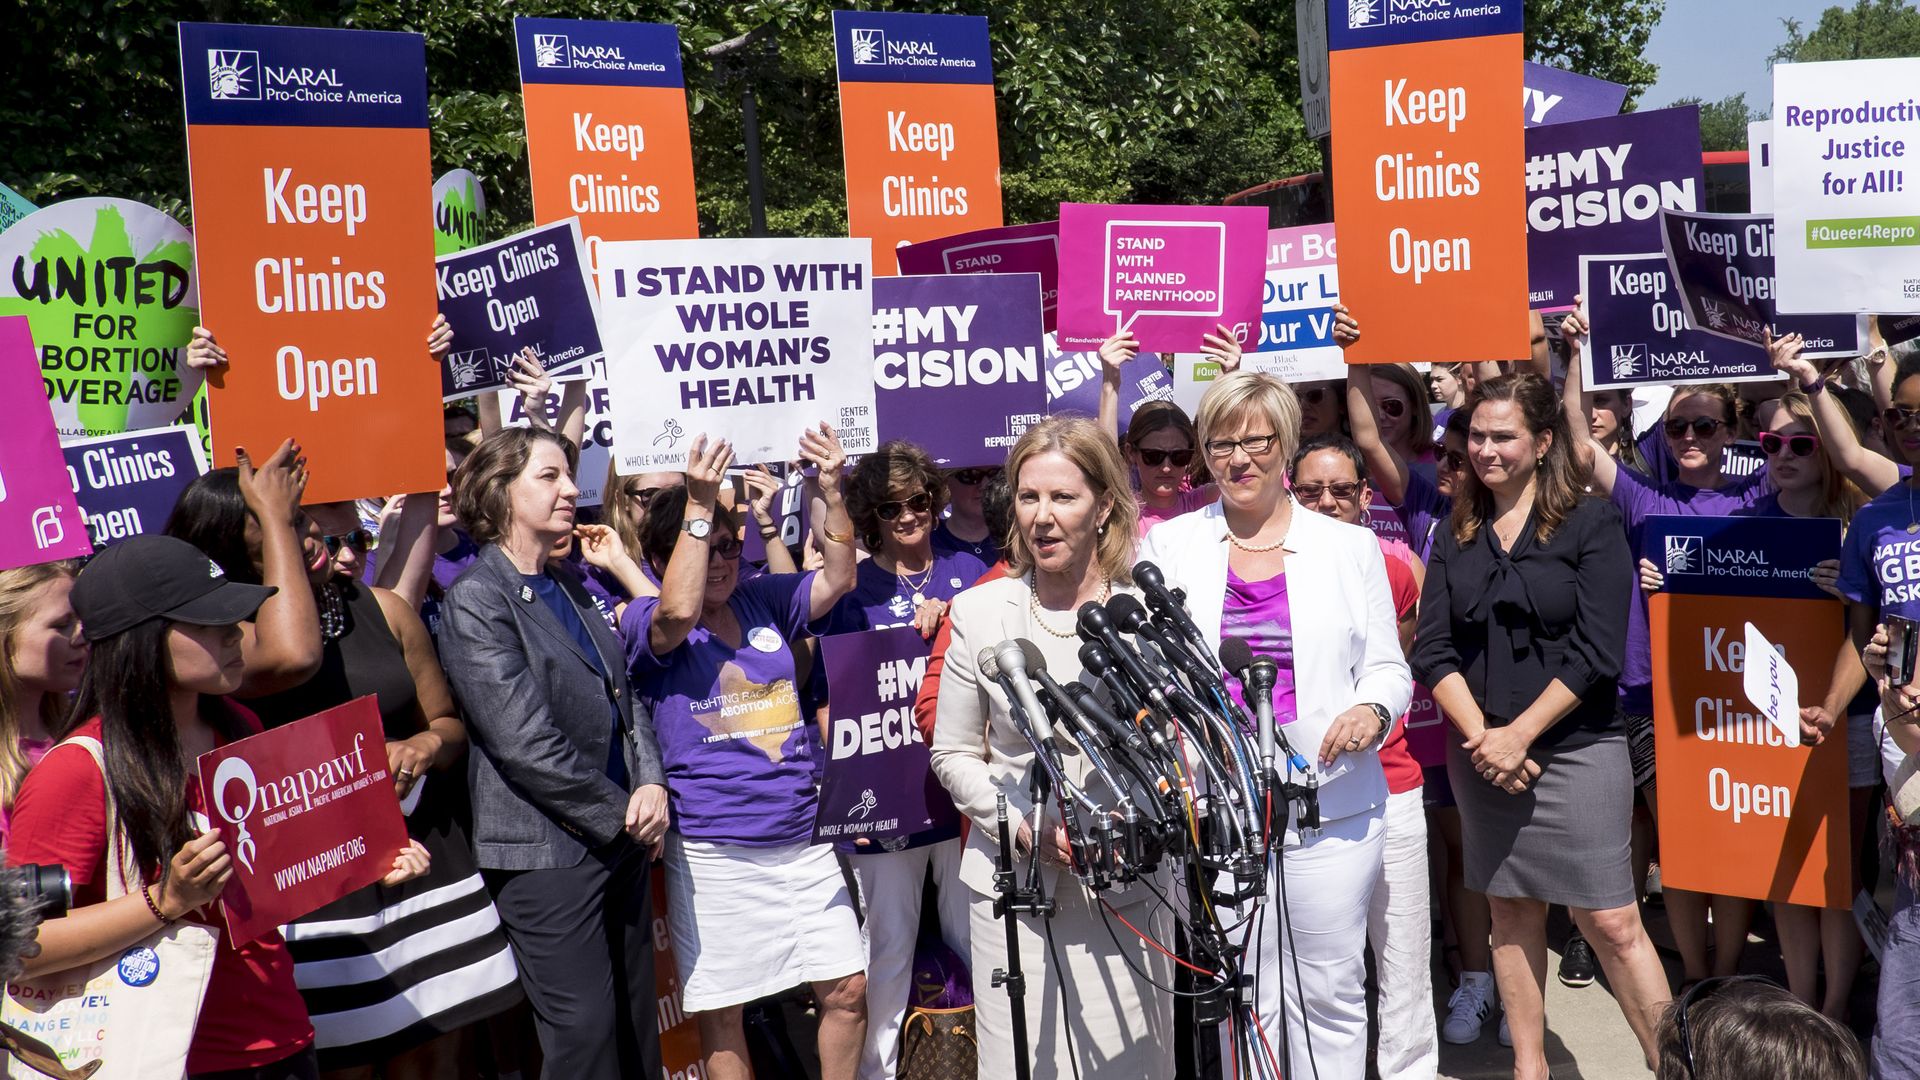 Texas abortion advocates outside the U.S. Supreme Court on June 27, 2016 in Washington, DC.